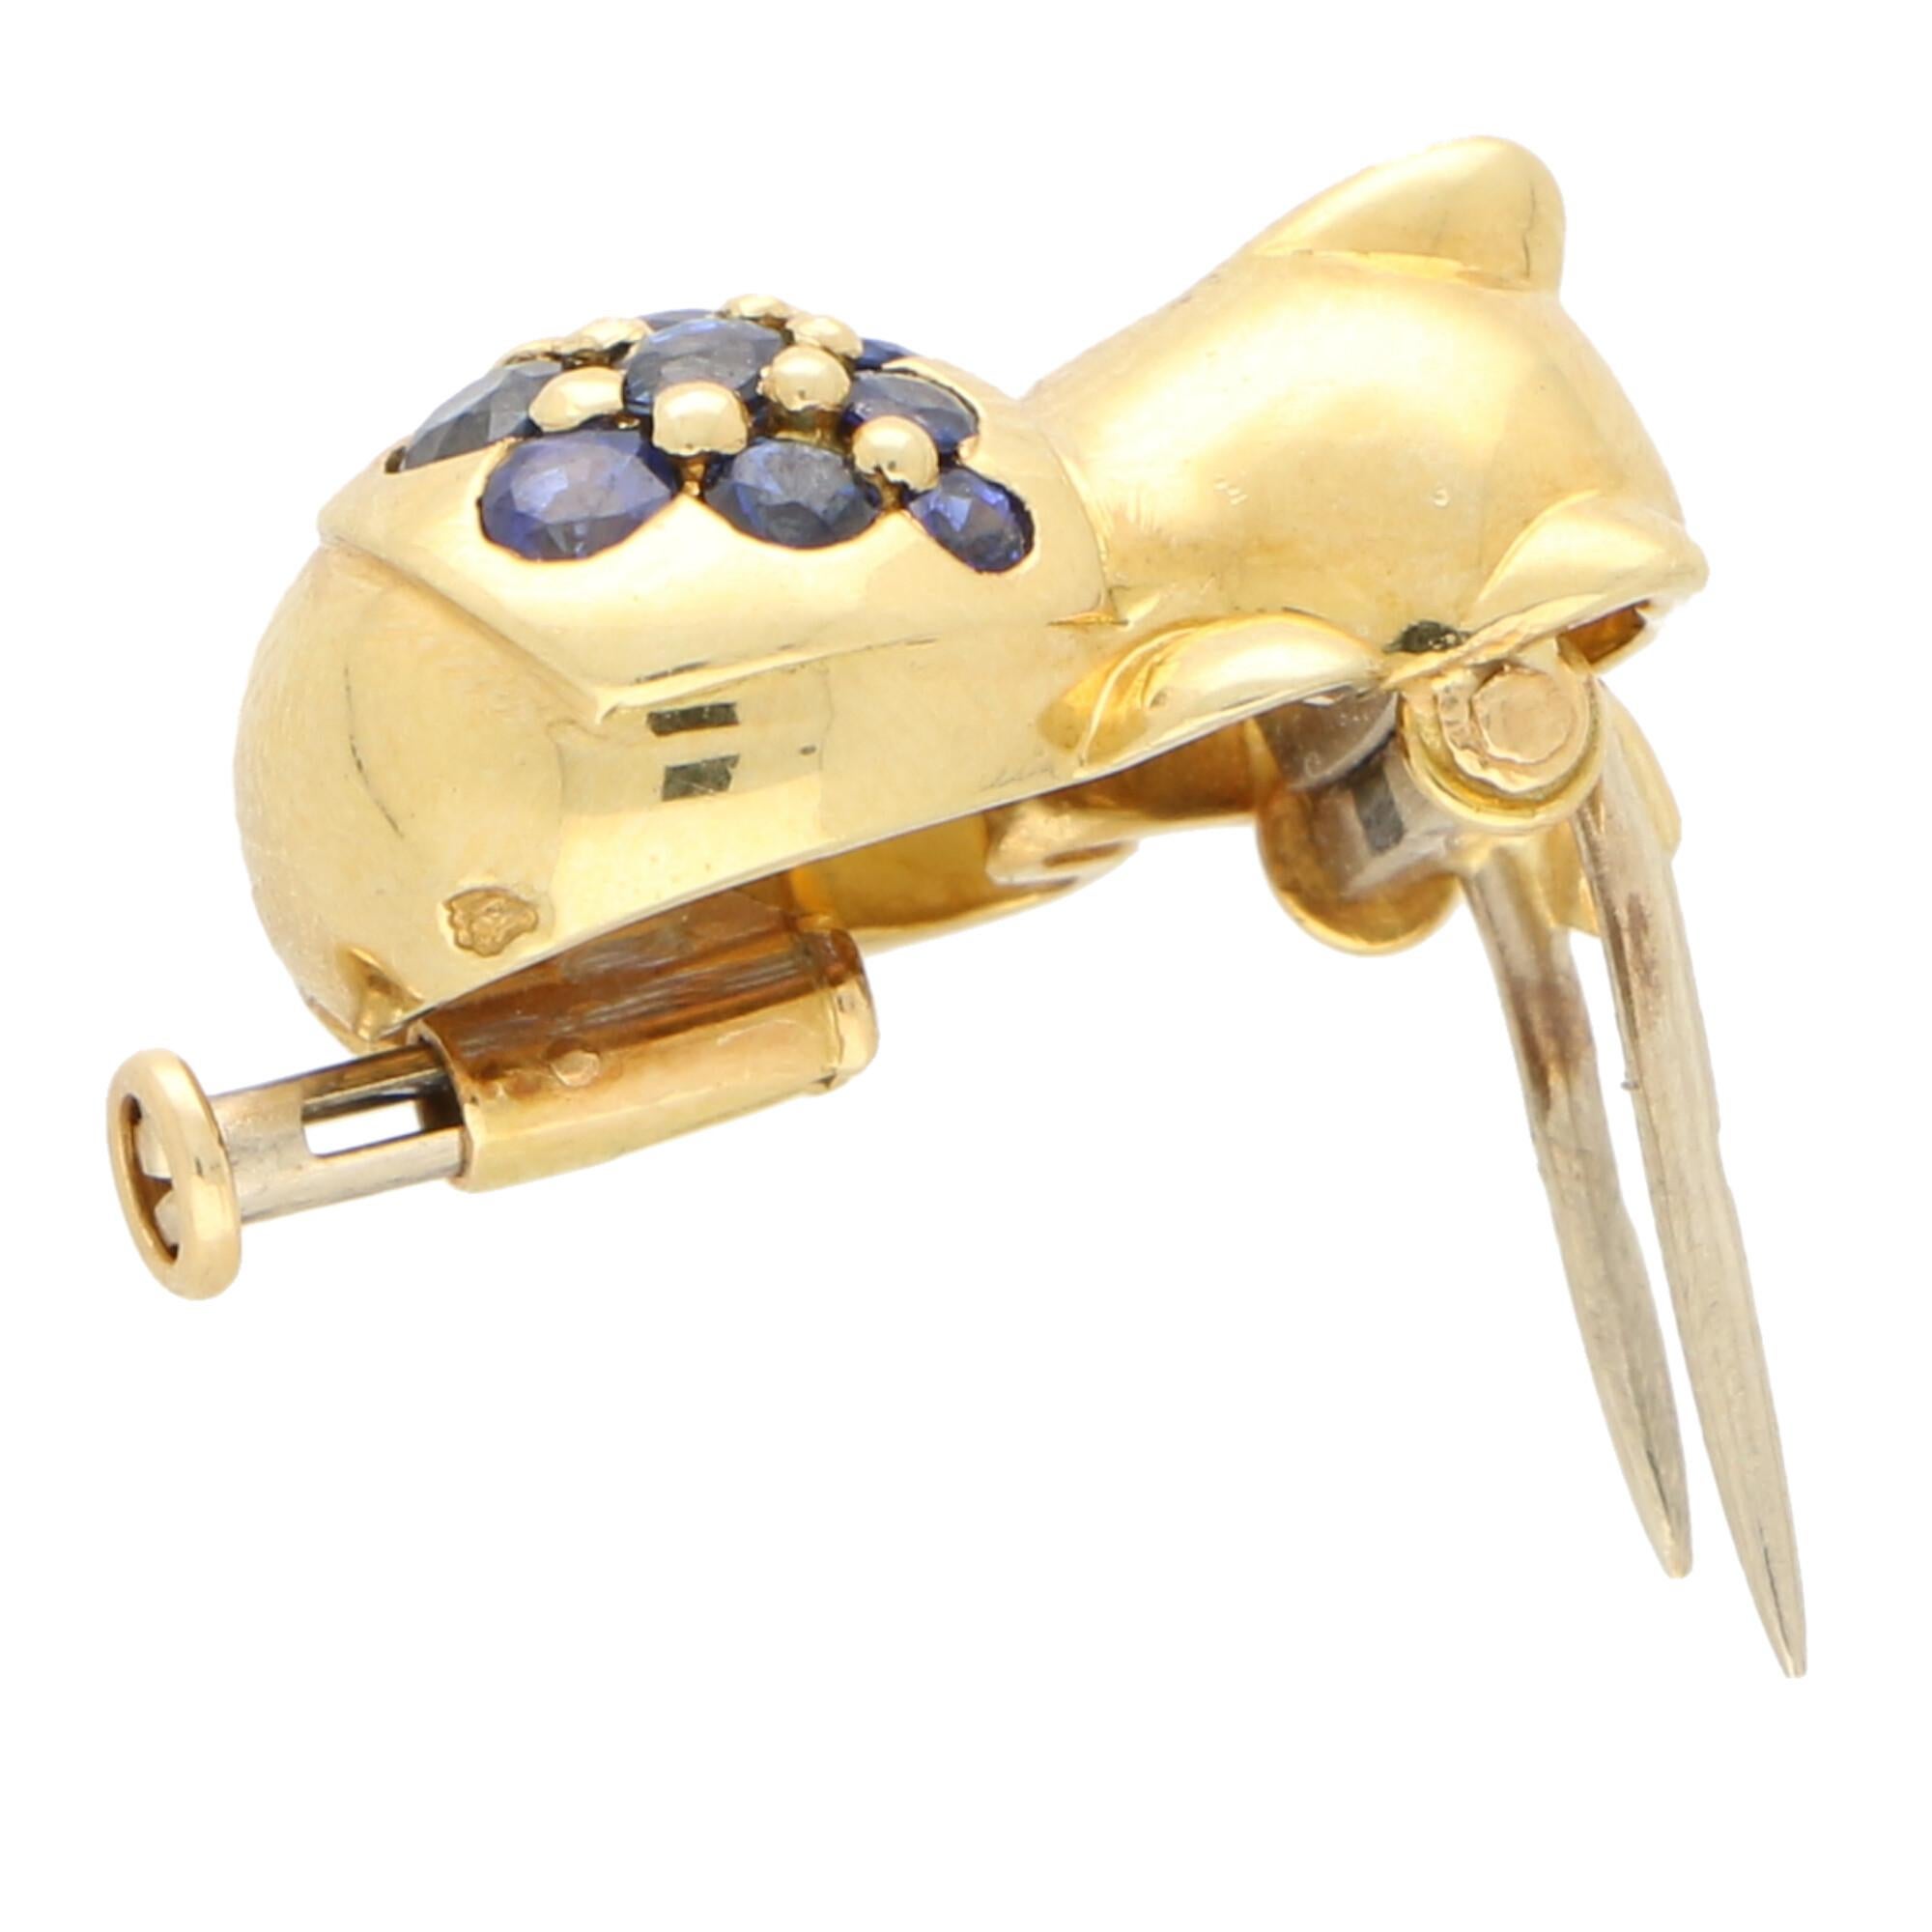 An incredibly sweet sapphire Boucheron Teddy bear pin/brooch set in 18k yellow gold.

This cute little piece depicts a lying down Teddy bear which is pave set on the back with 12 round cut clue sapphires. The bear is beautifully detailed and is